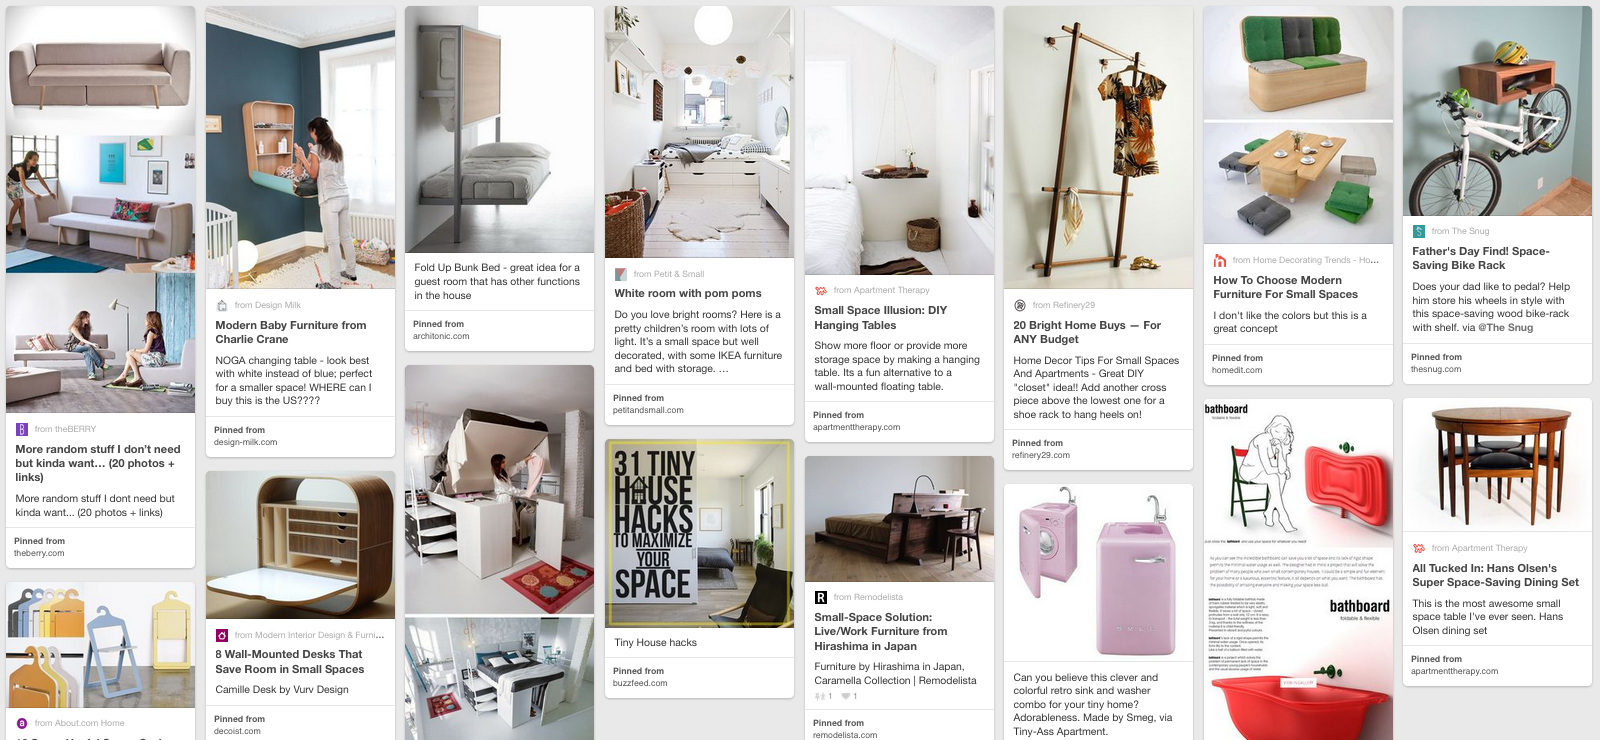 Small Space Furnishings on Pinterest